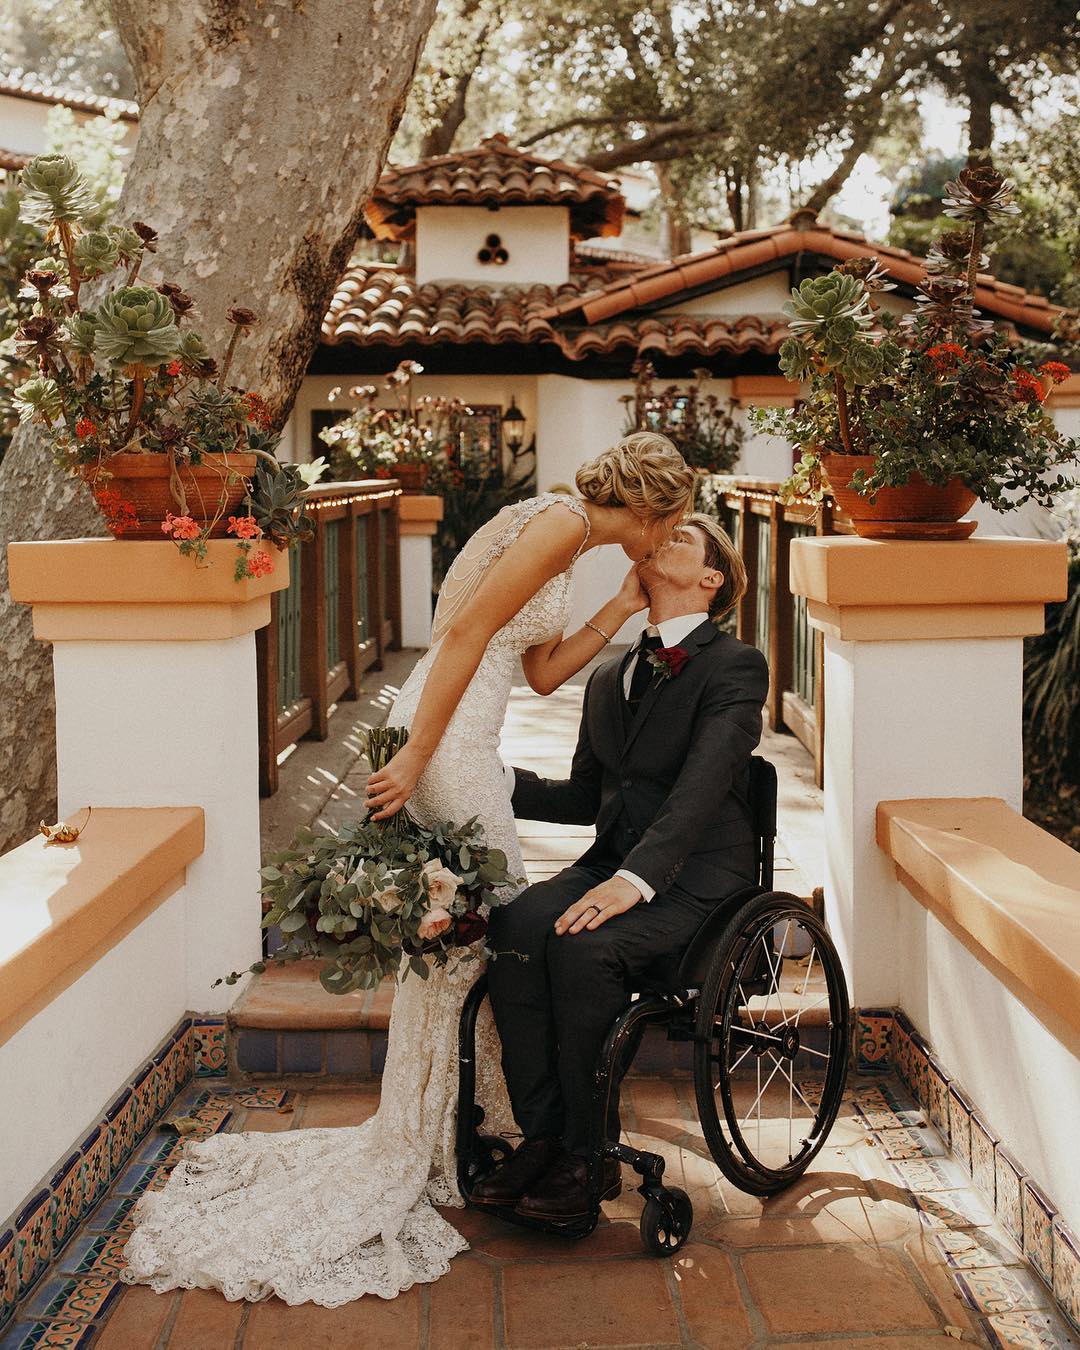 Bride and Groom Kissing in a Beautiful Location. Photo by Instagram user @jordanvoth